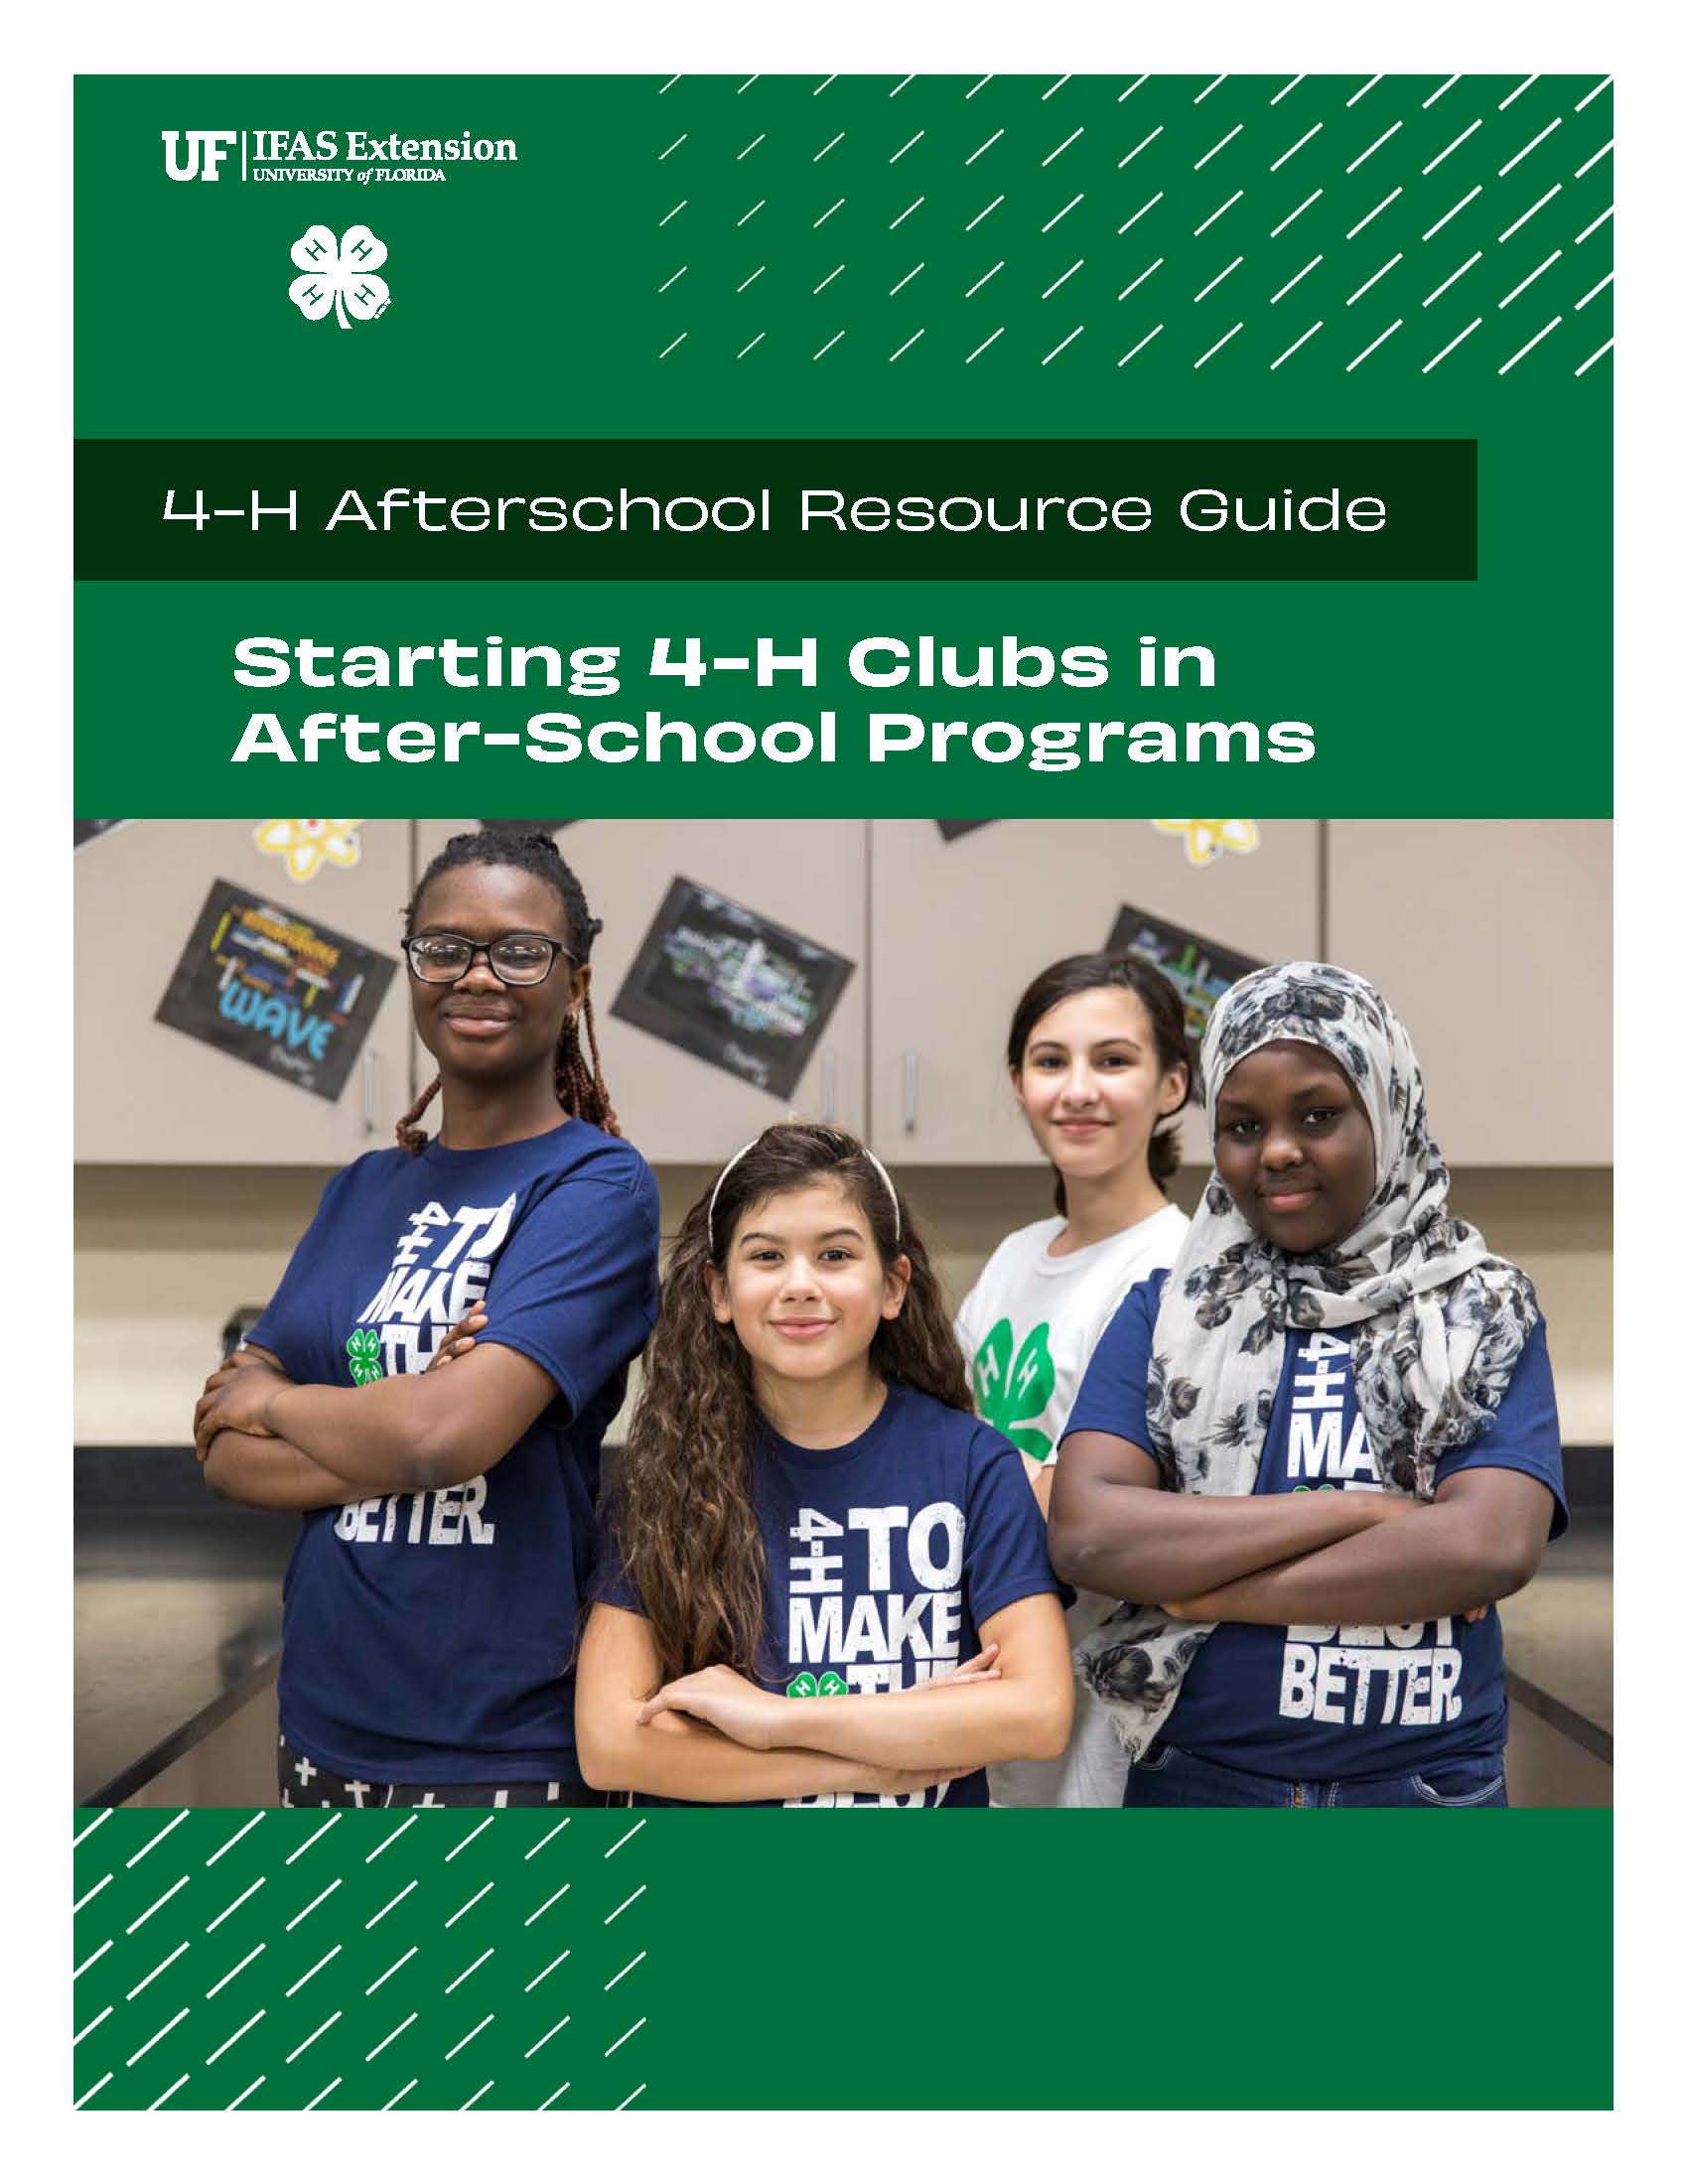 Four 4-H members on cover page for Starting 4-H Clubs in After-School Programs